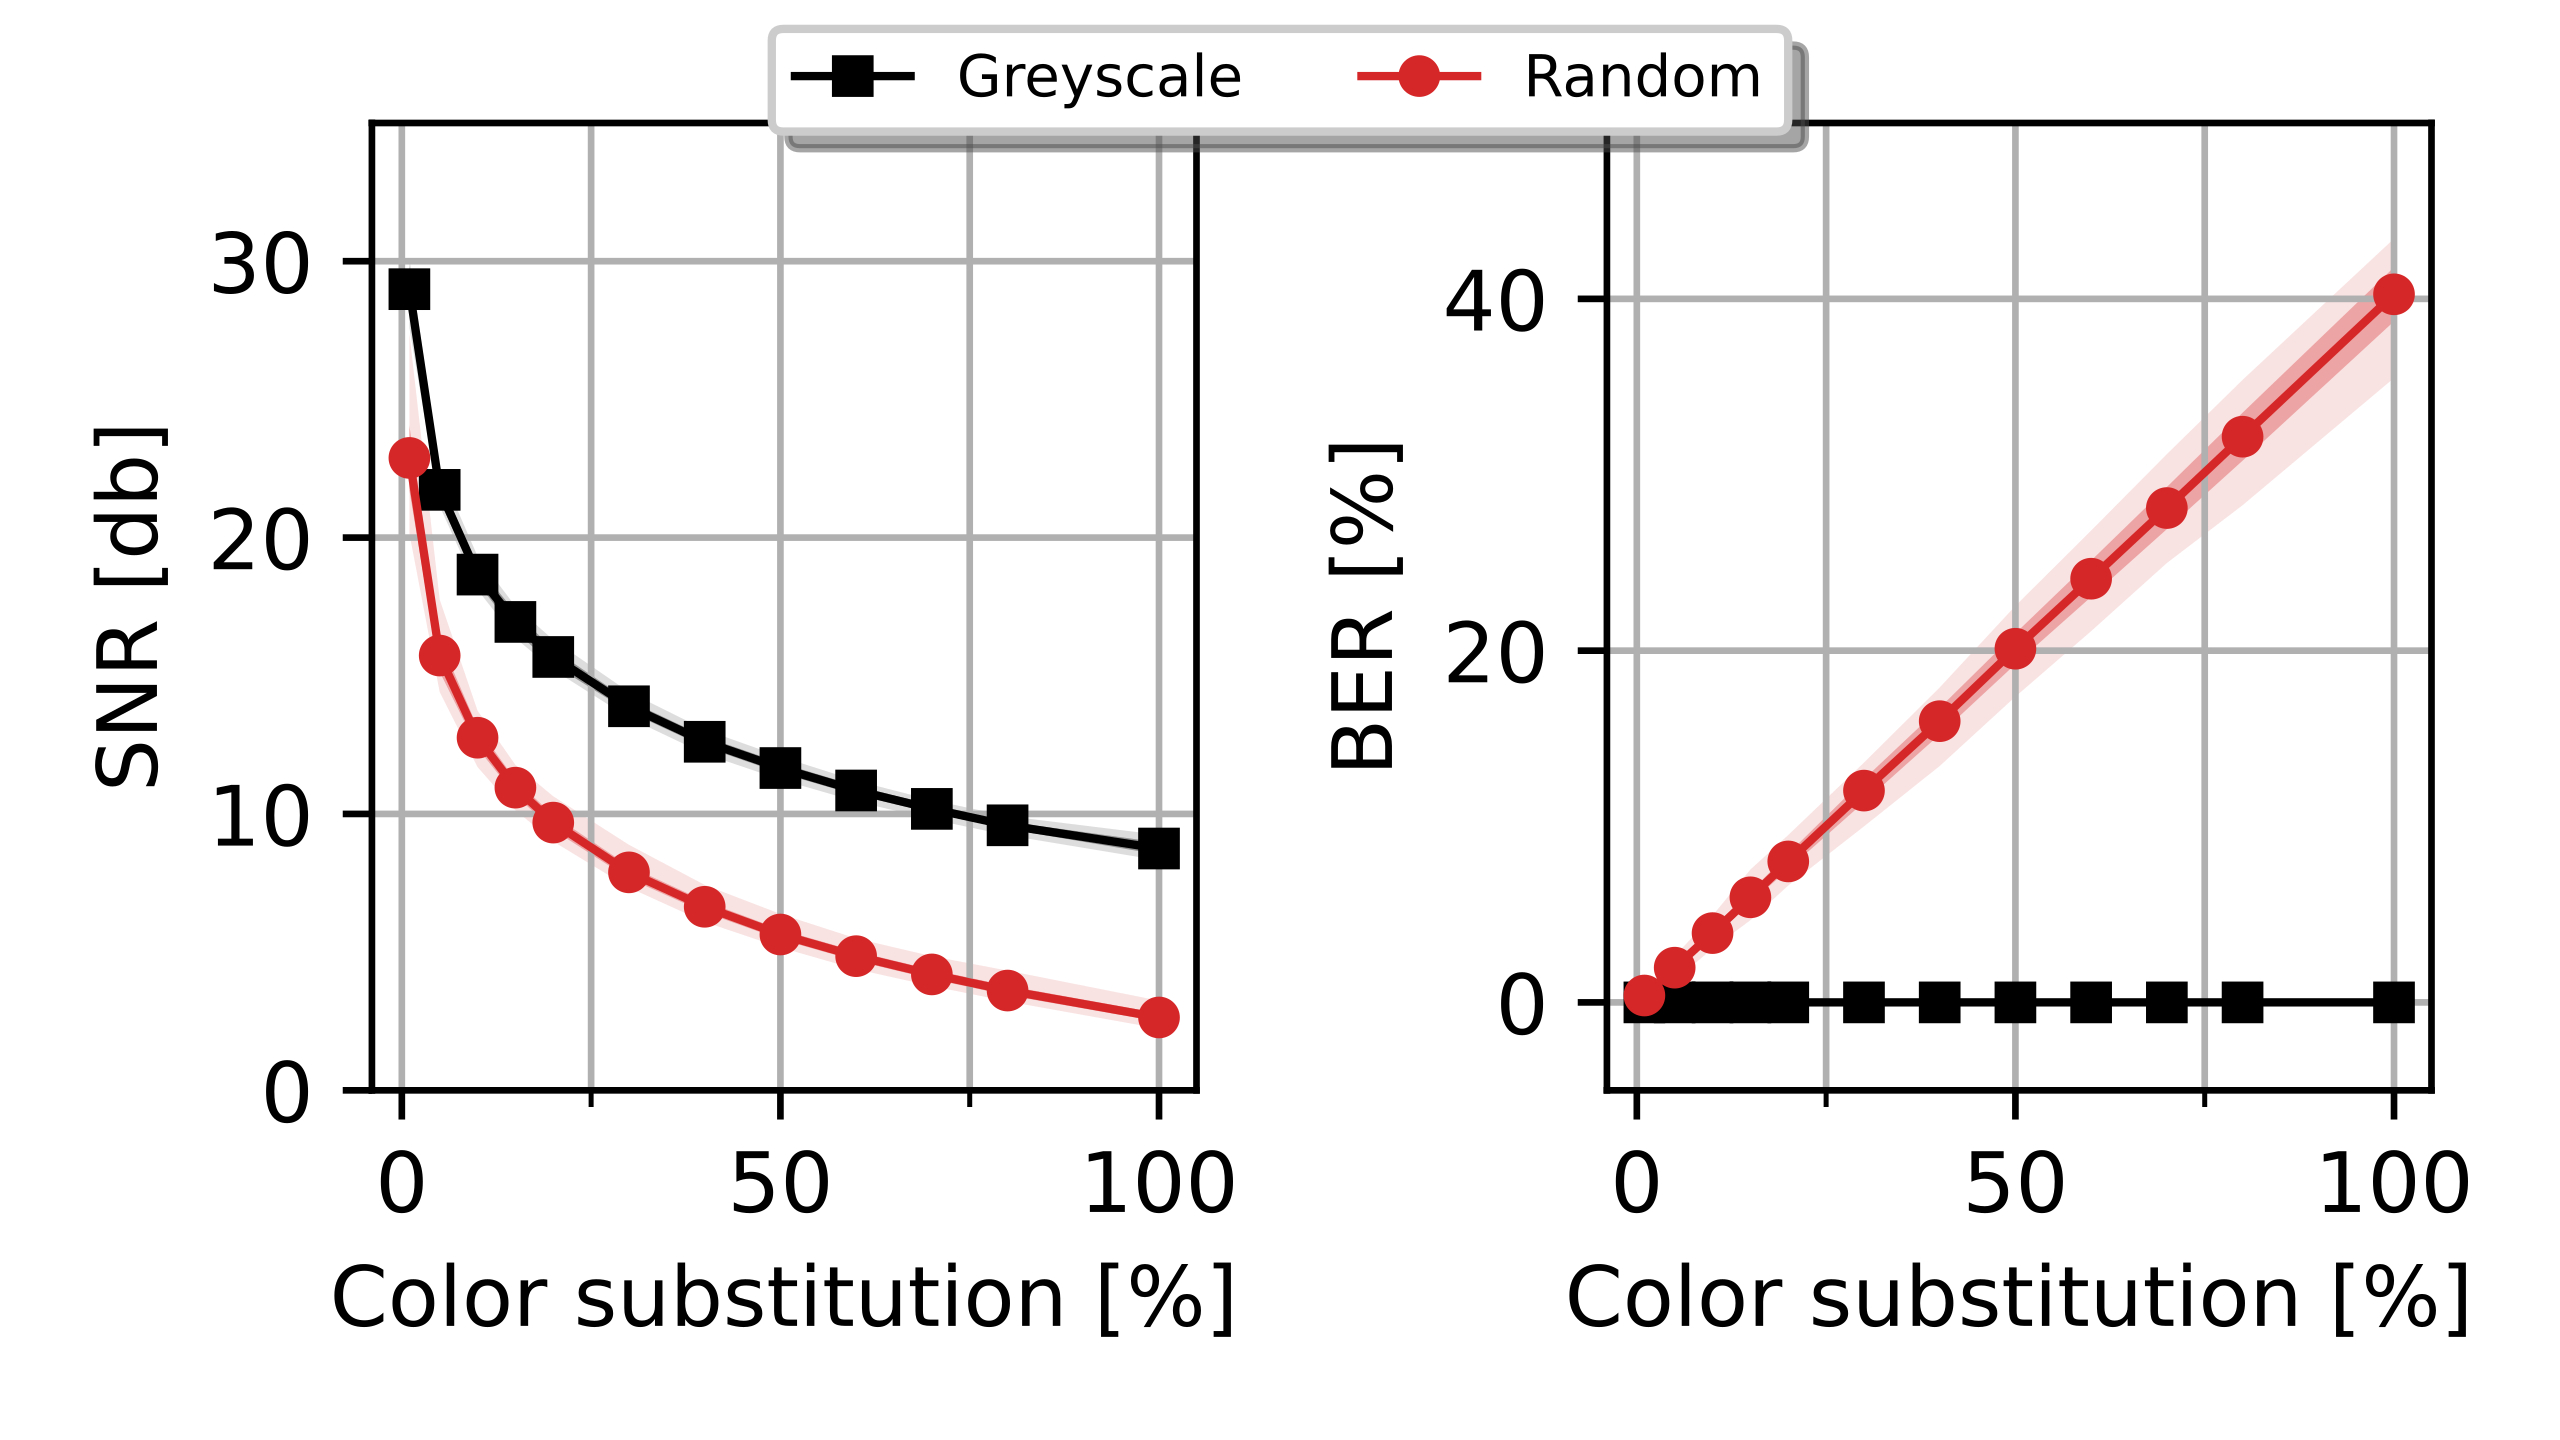 SNR and BER results for Experiment 1 before sending the QR Codes through any channel, only taking into account the QR Codes where all the area has been used (EC&D). Lines and points show average data, light shadows show the min and max values, and heavy shadows show the standard deviation for each color substitution ratio. Left: SNR results for Greyscale (squares, black) and Random (dots, red) methods. Right: BER results for Greyscale (squares, black) and Random (dots, red) methods.